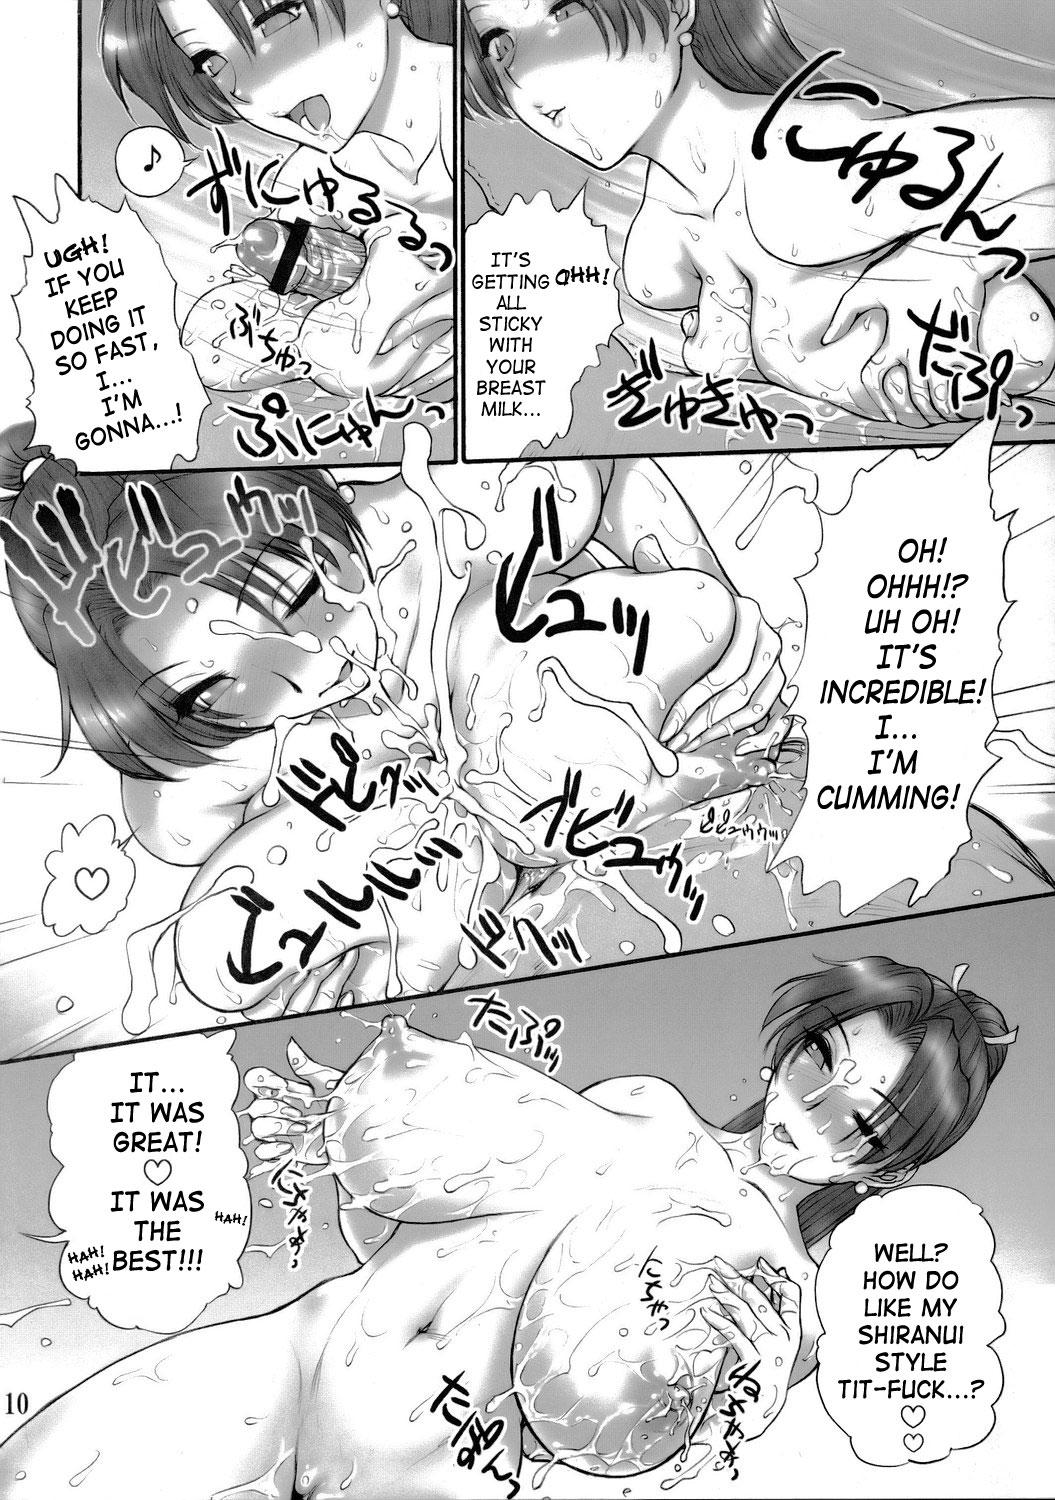 Blowjob Contest (SC29) [Shinnihon Pepsitou (St. Germain-sal)] Report Concerning Kyoku-gen-ryuu (The King of Fighters) [English] [SaHa] - King of fighters Cock Suckers - Page 11